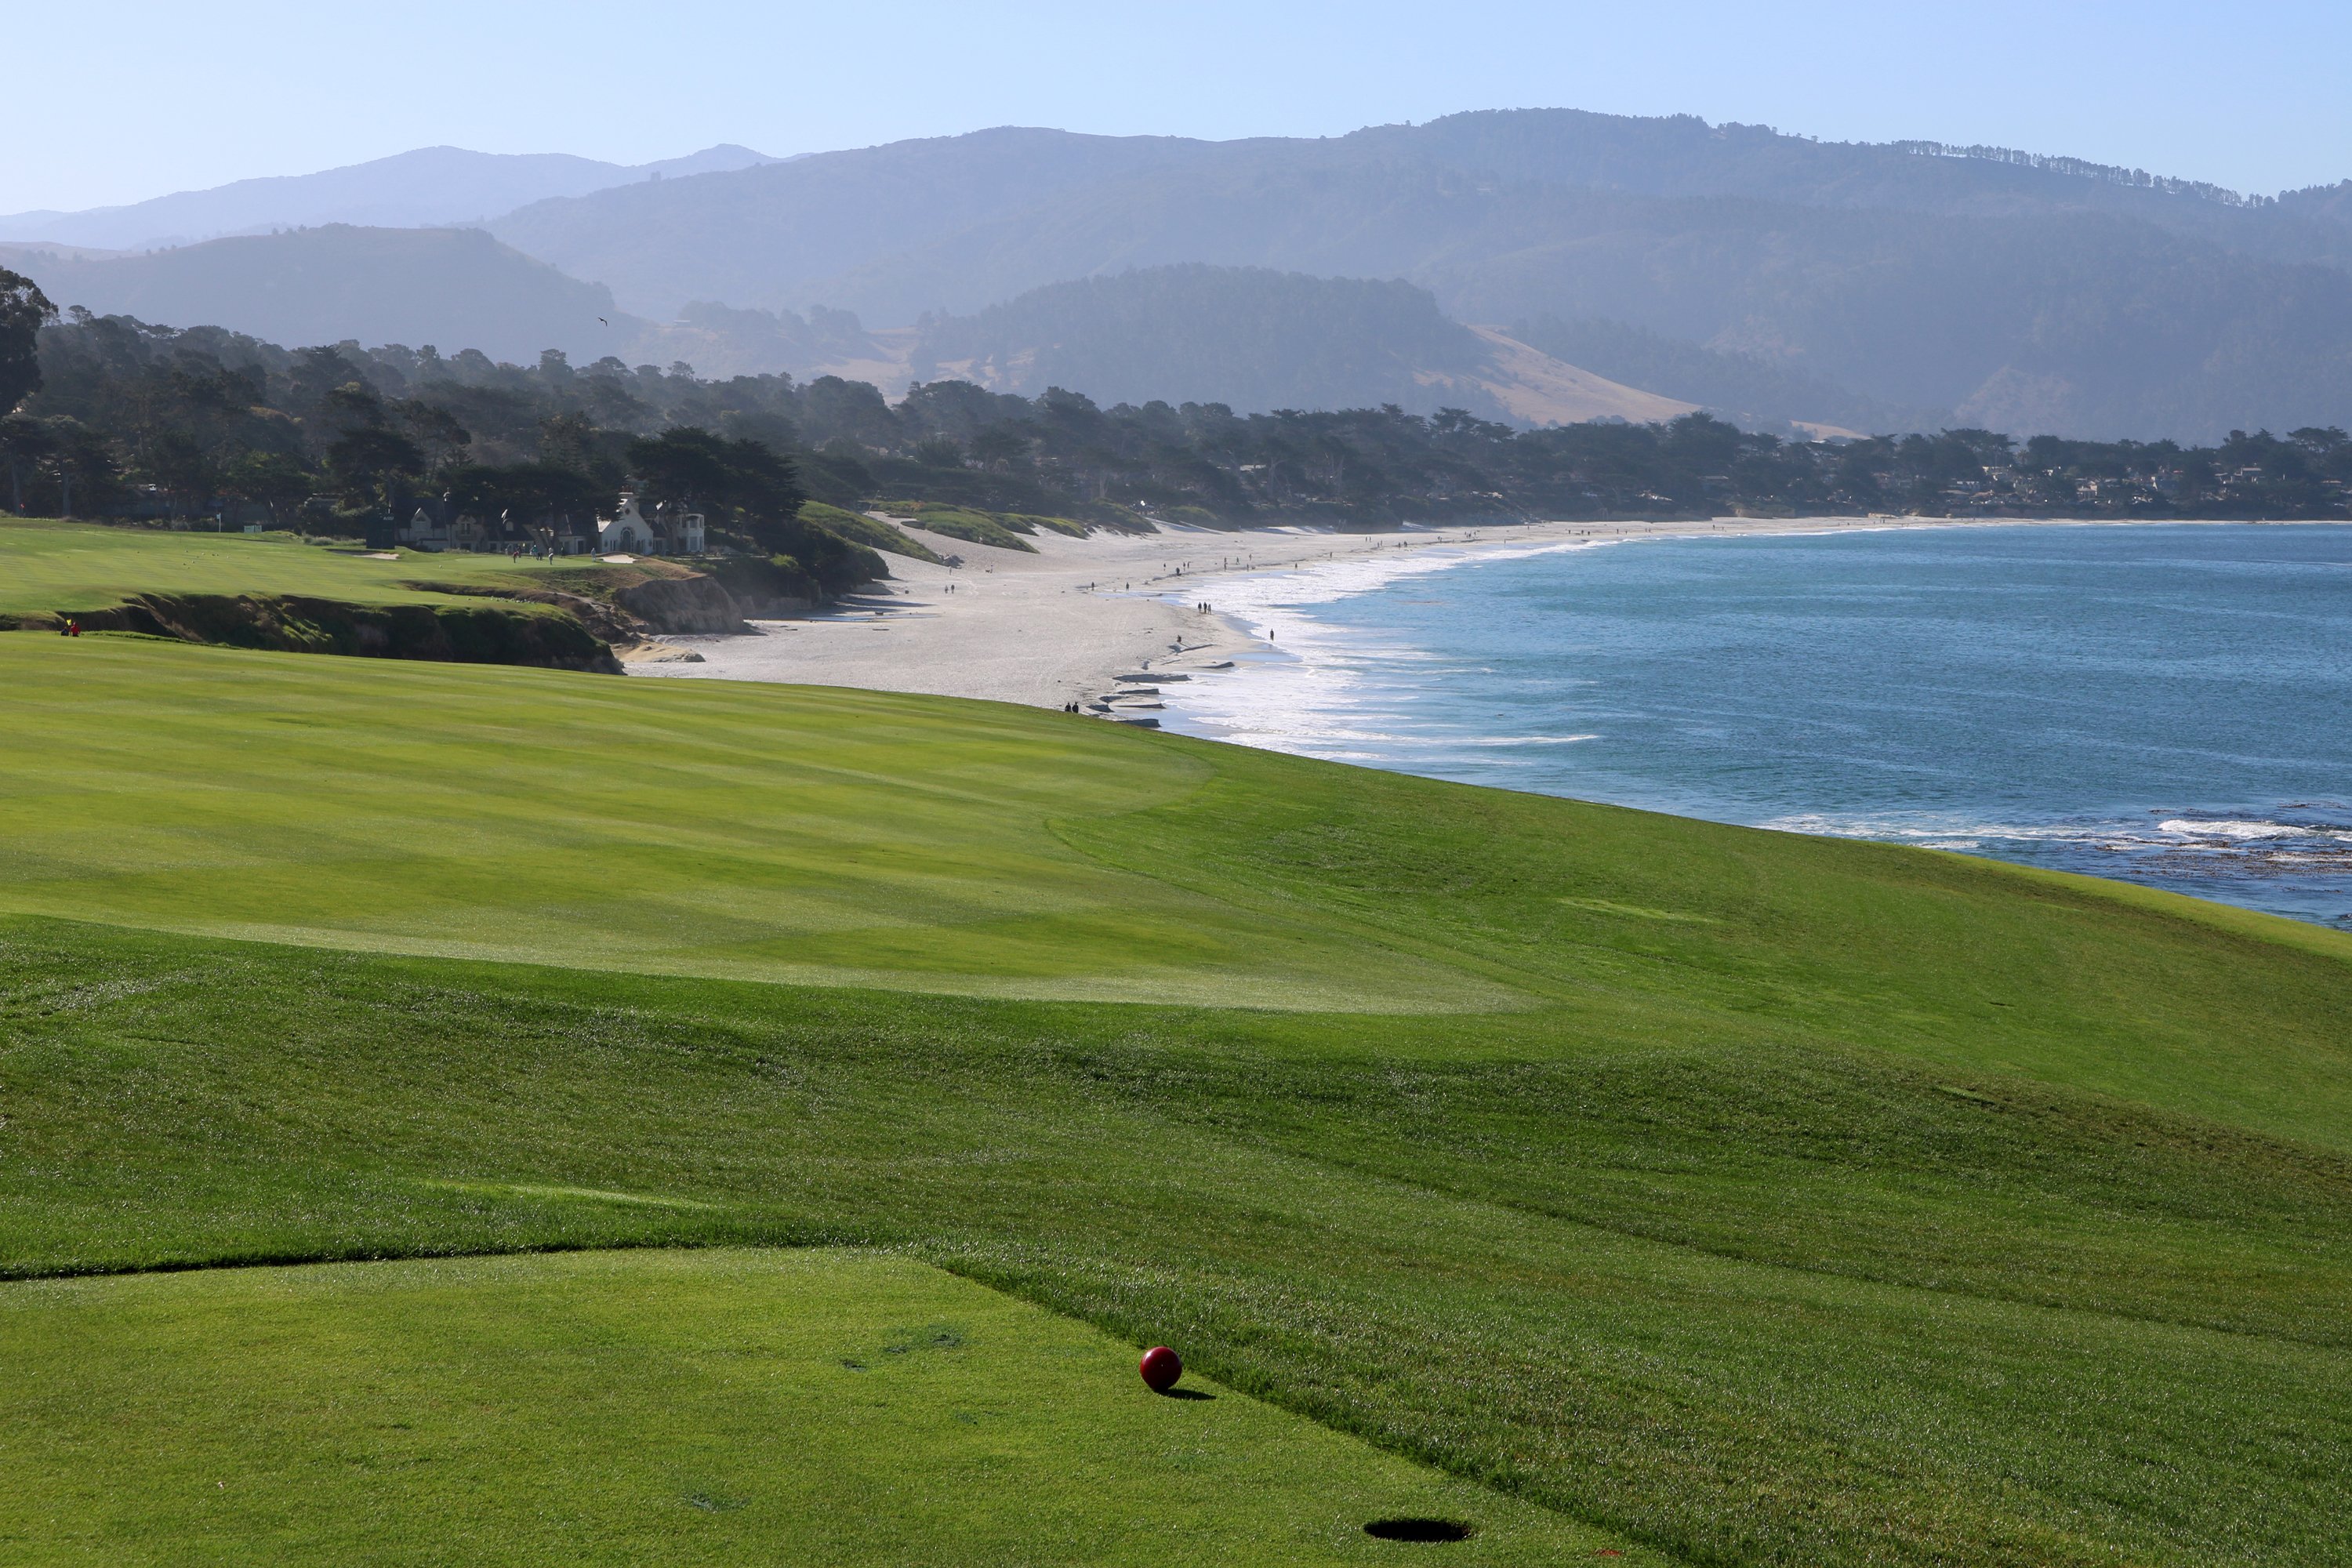 Blues skies, warm weather and a scenic view near the 9th hole of Pebble Beach Golf Links